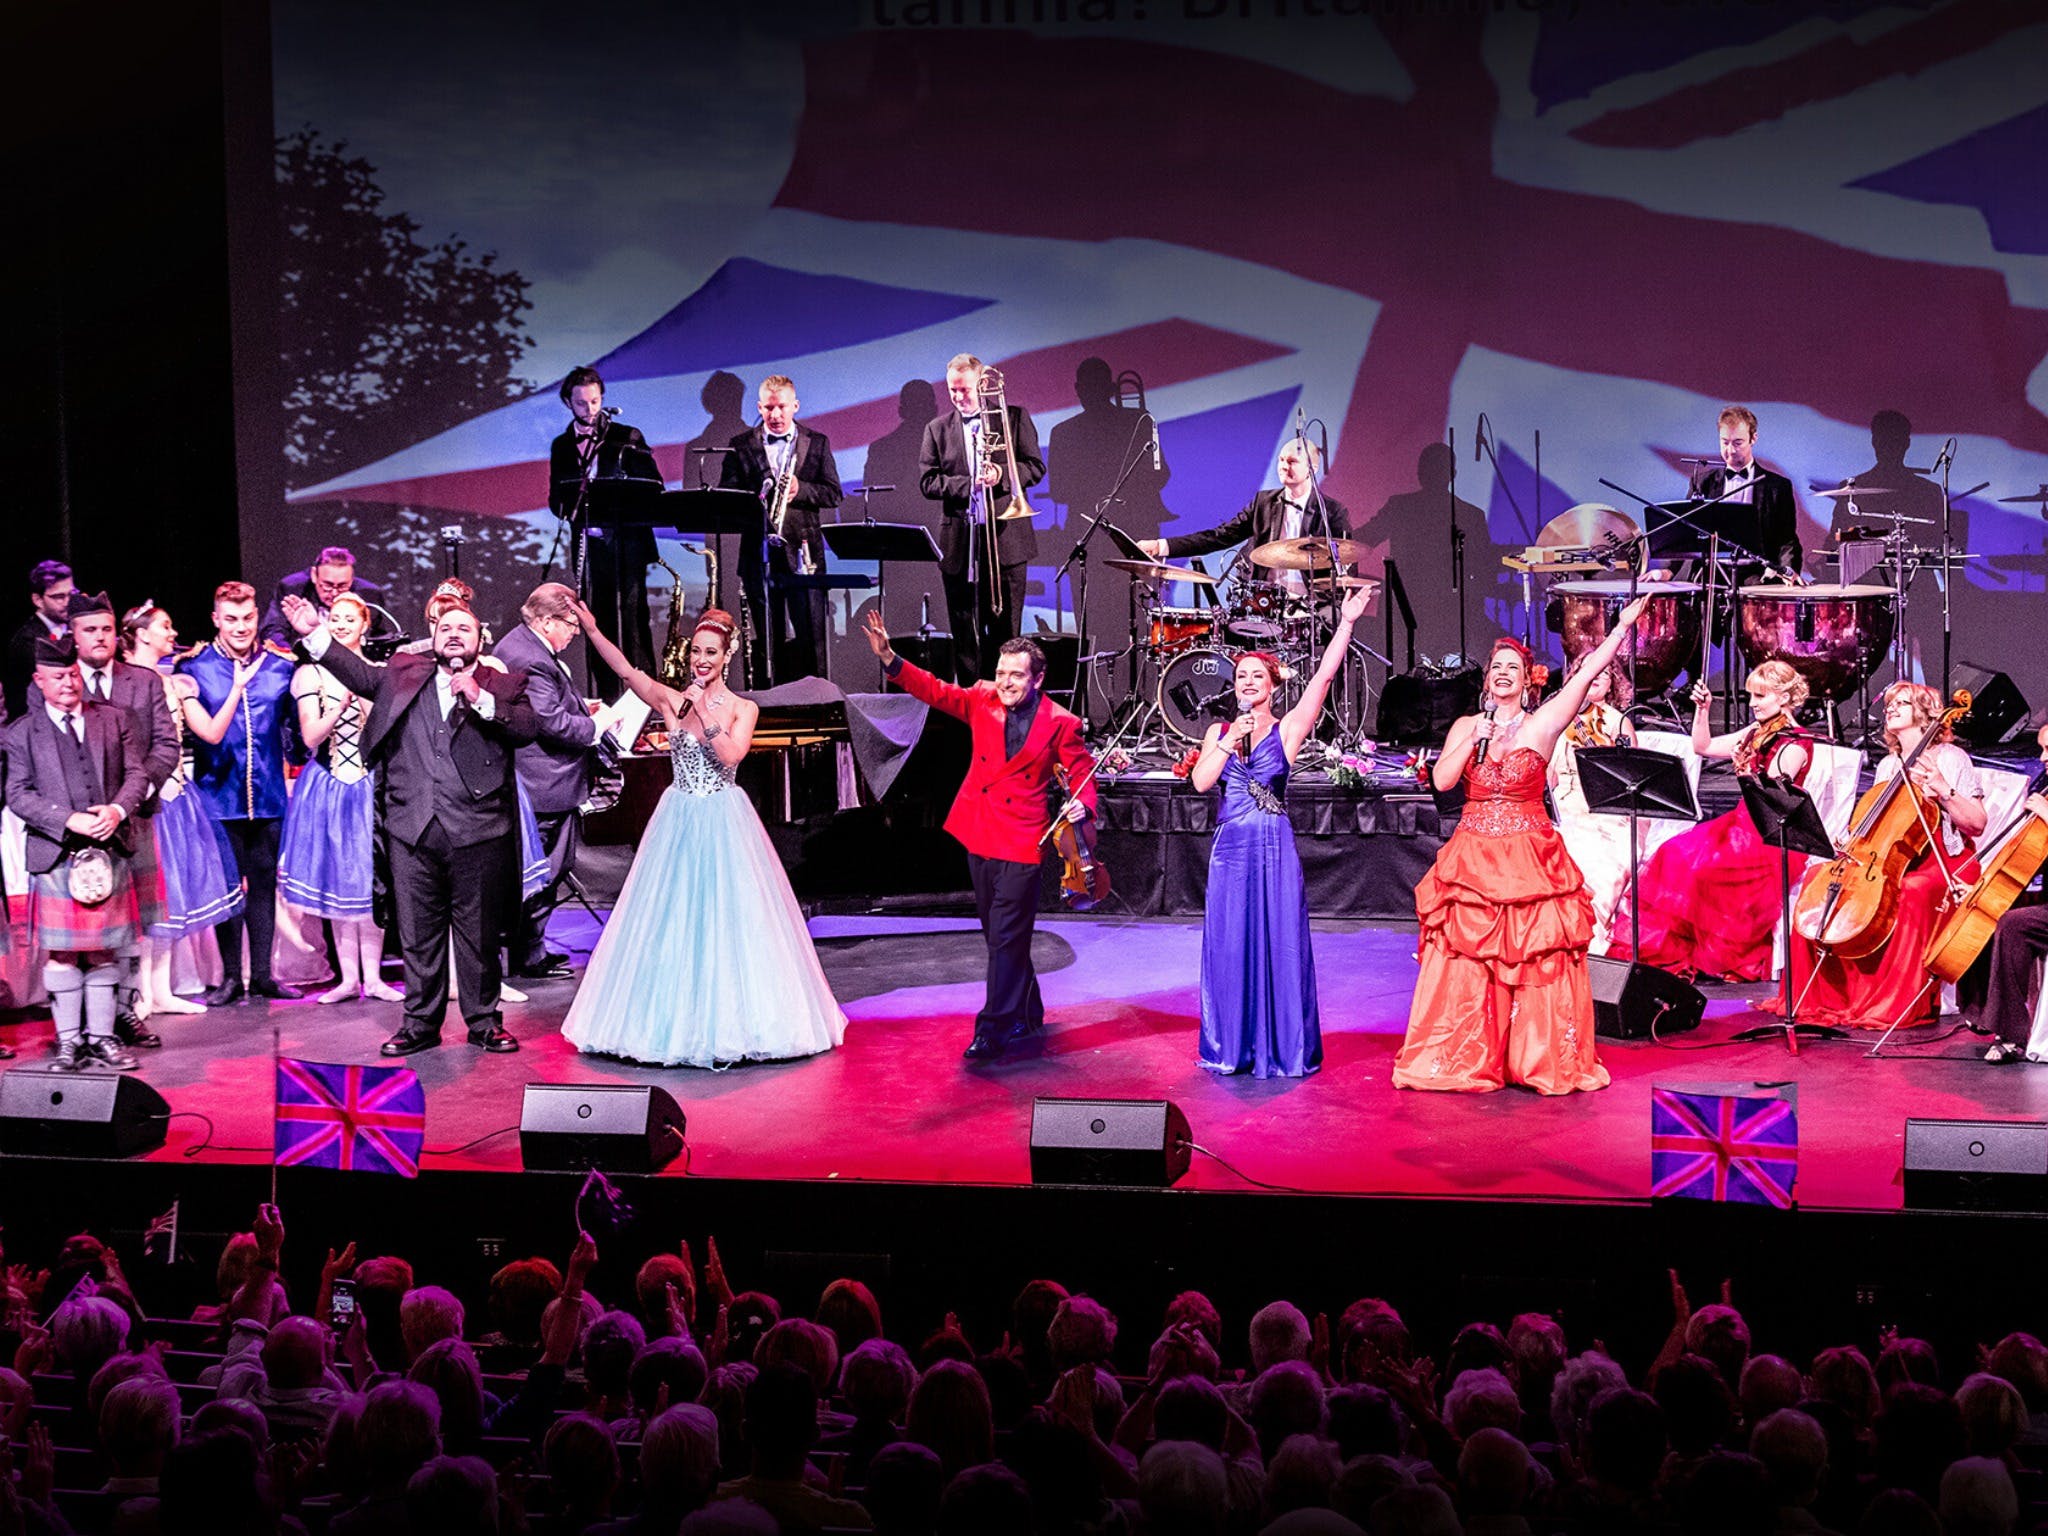 An Afternoon at the Proms - A Musical Spectacular - Pubs and Clubs